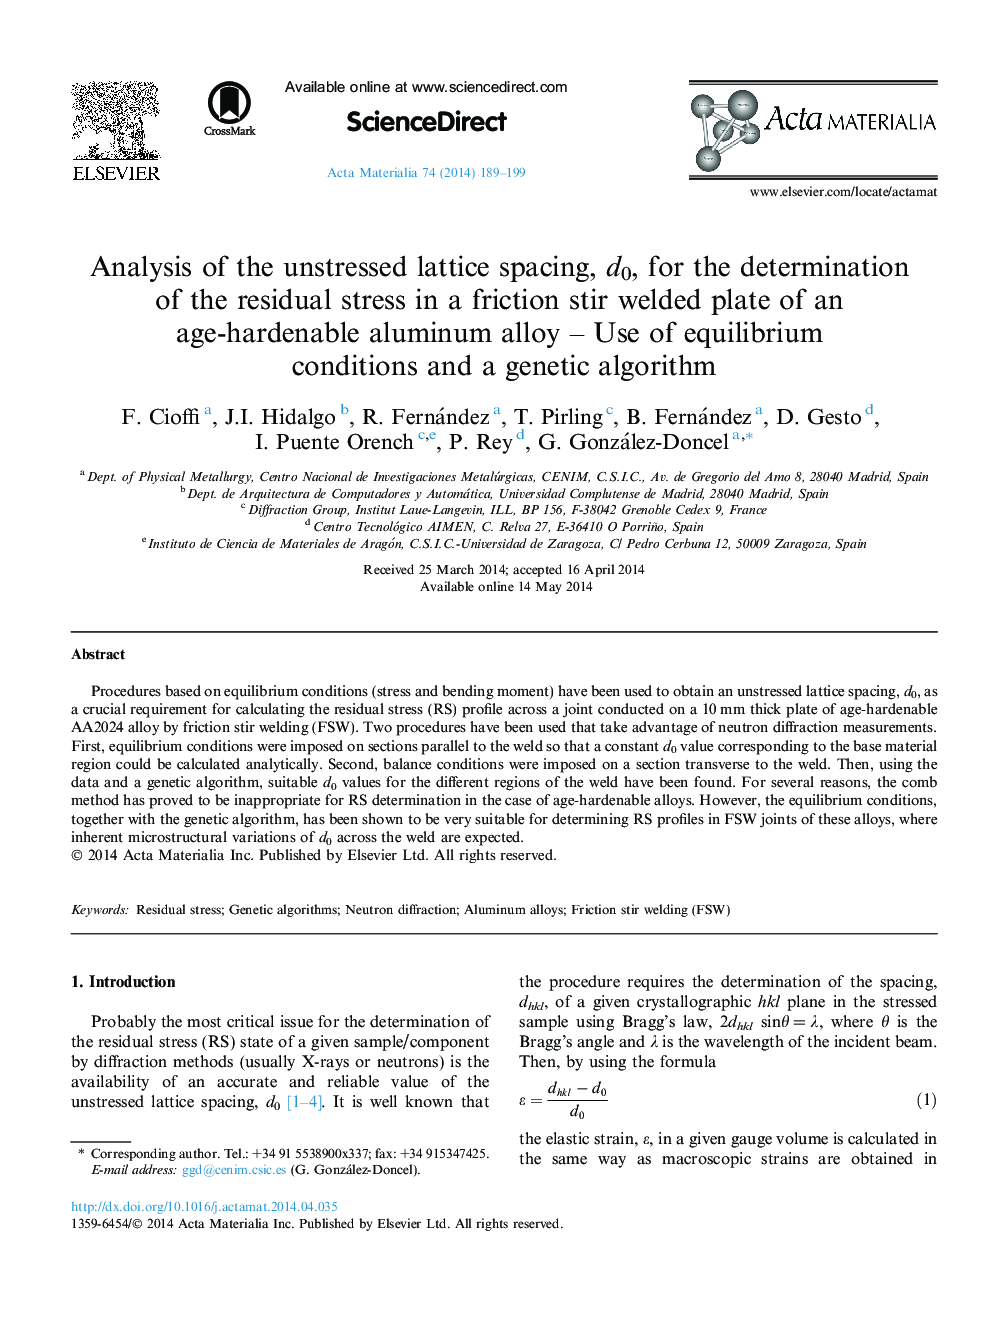 Analysis of the unstressed lattice spacing, d0, for the determination of the residual stress in a friction stir welded plate of an age-hardenable aluminum alloy - Use of equilibrium conditions and a genetic algorithm